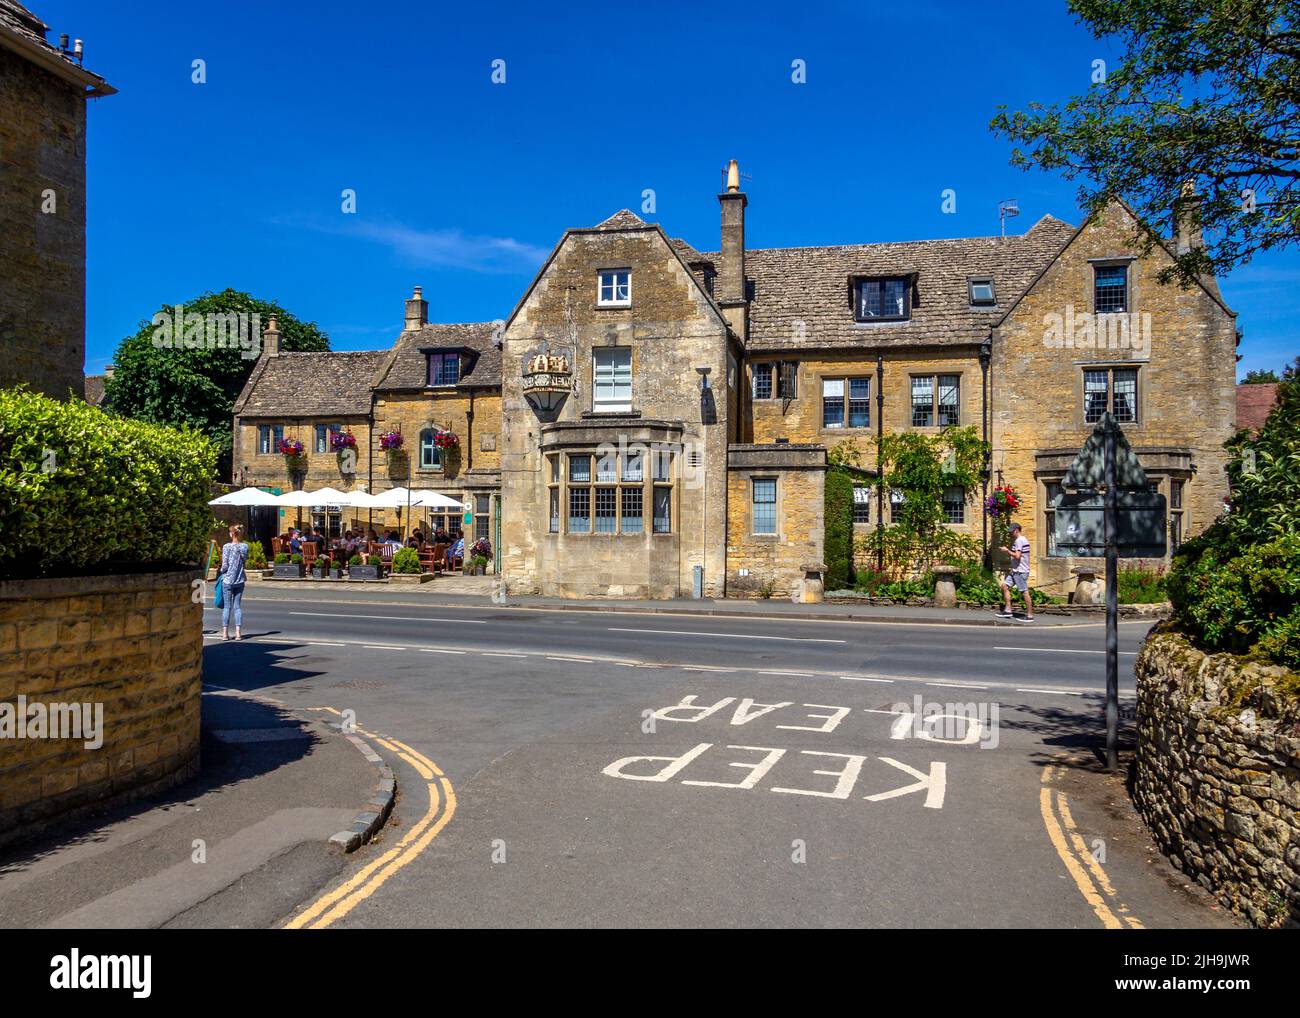 The Old New Inn in Bourton on the Water, Gloucestershire, England. Stock Photo